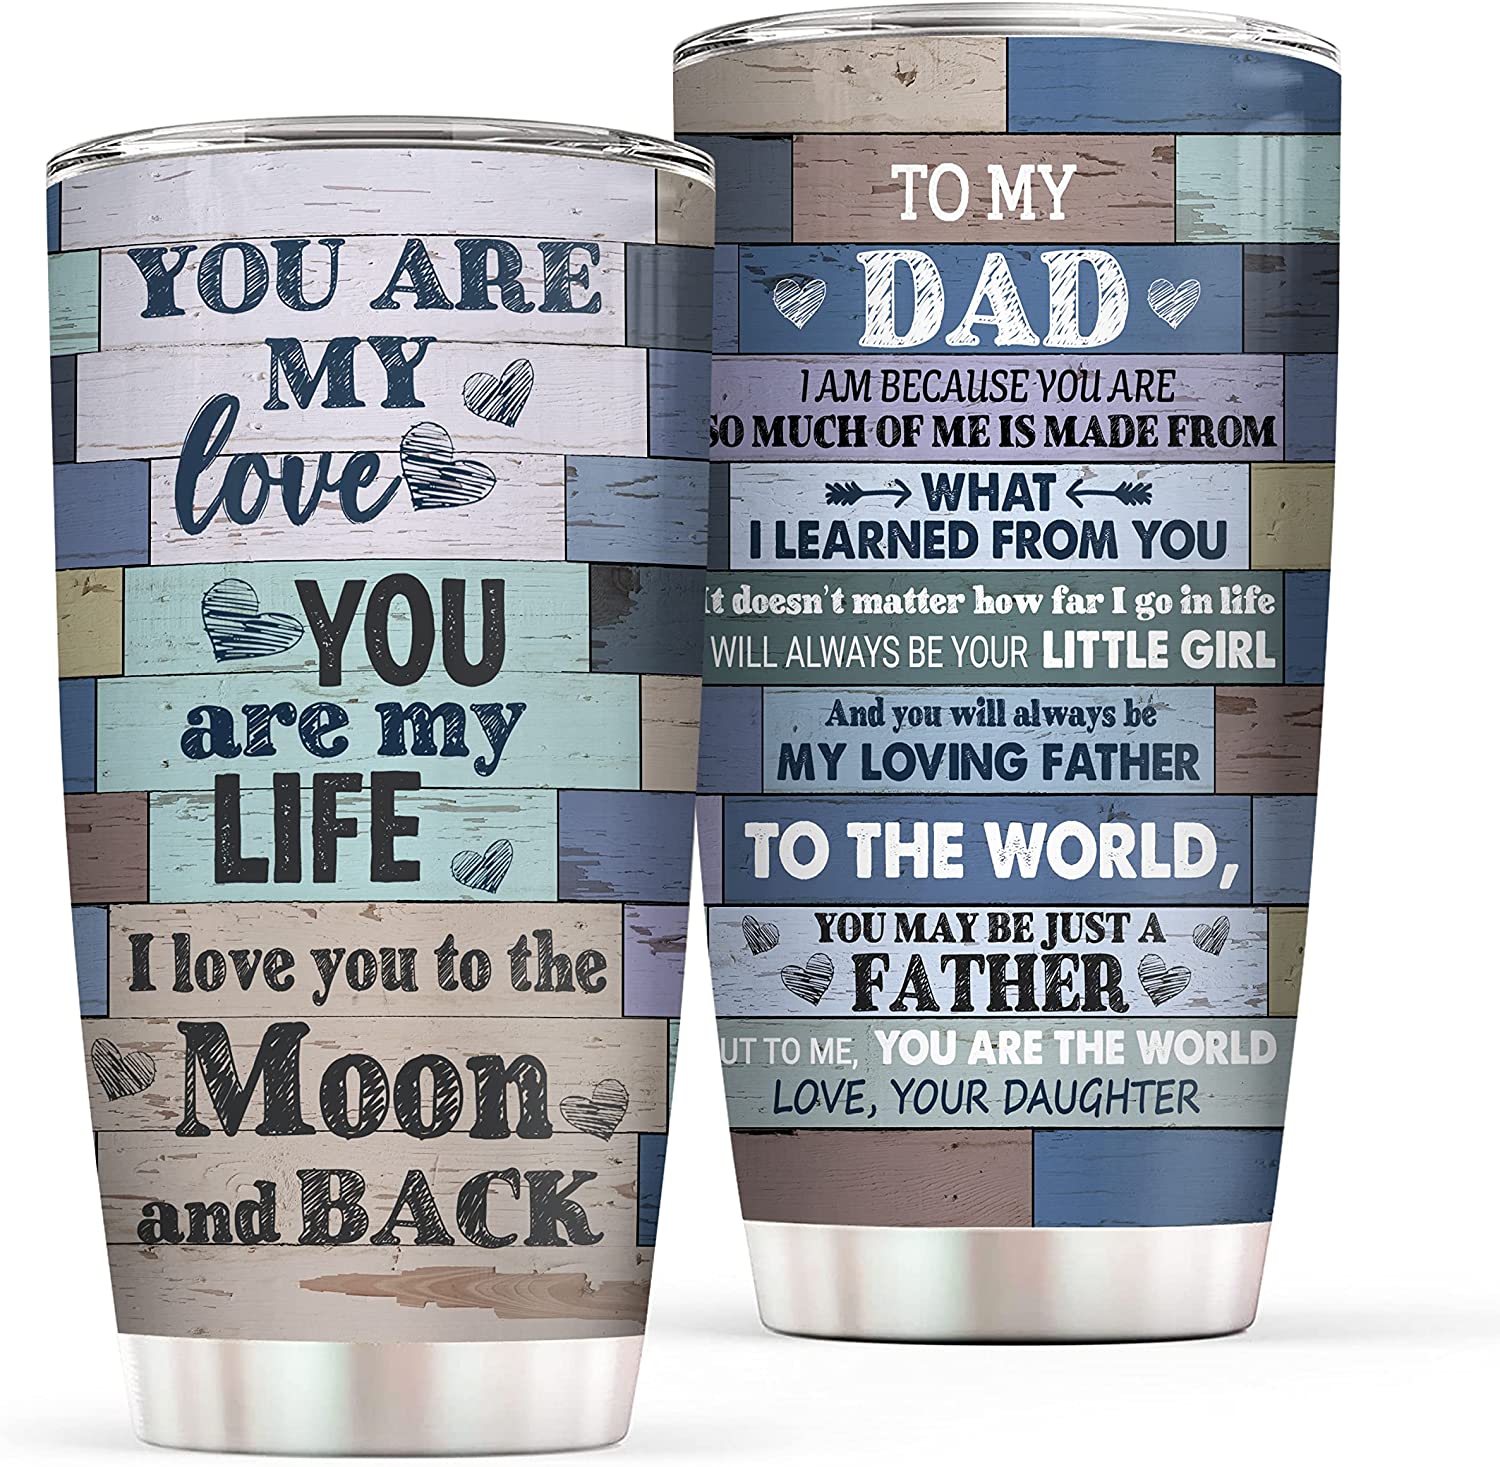 Dad Gifts from Daughter - To My Dad I Love You 20oz Tumbler - Worlds Best Dad Gifts on Fathers Day, Birthday